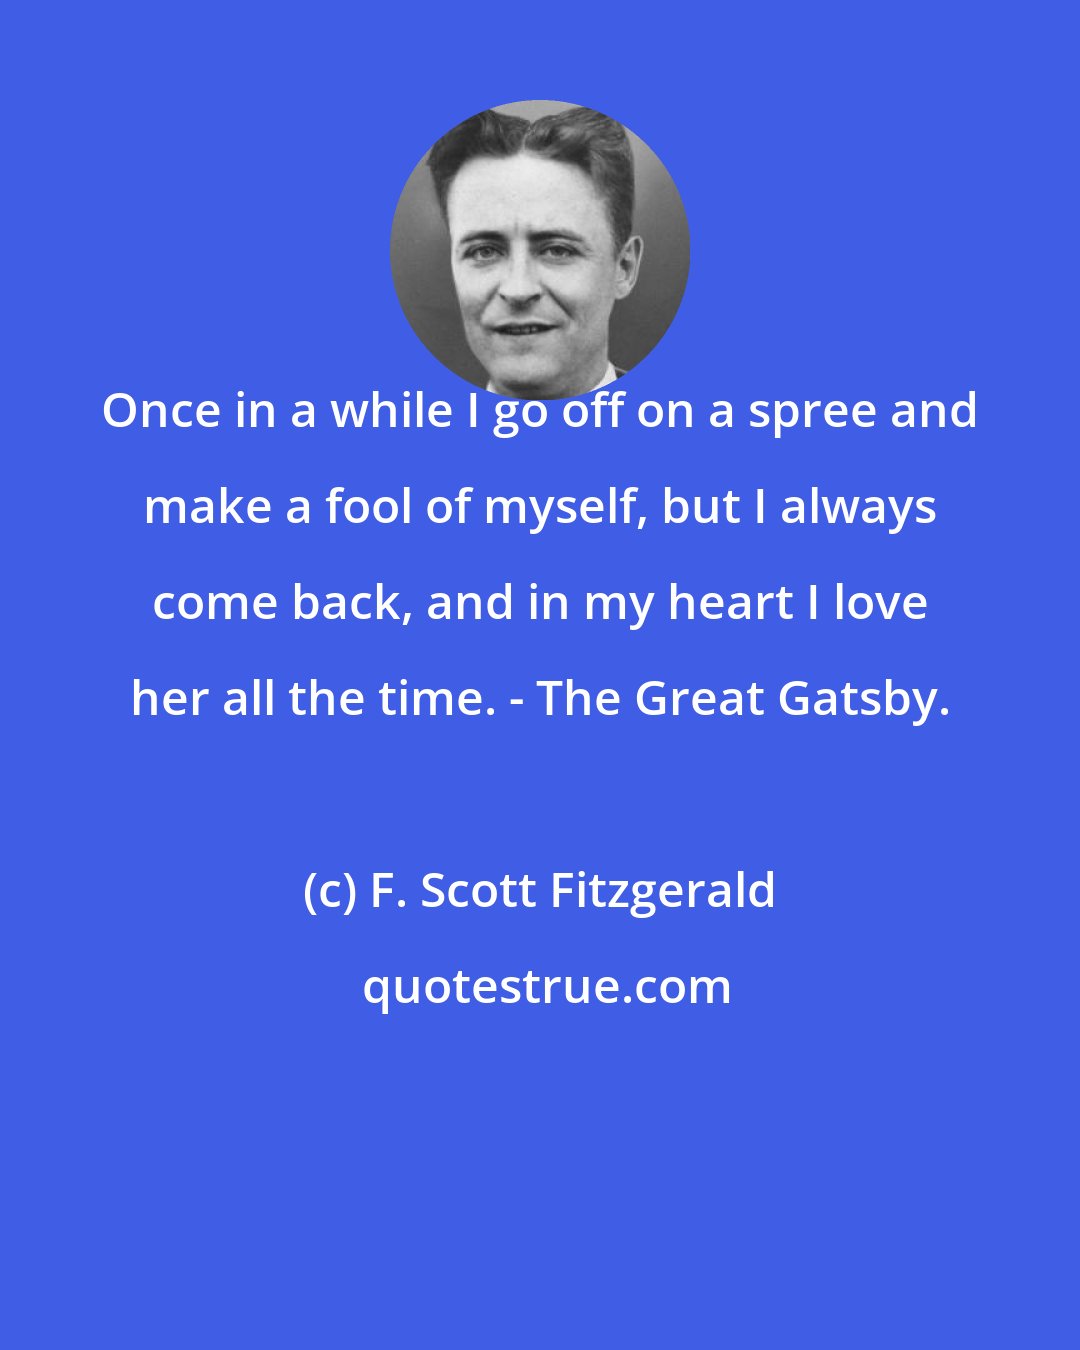 F. Scott Fitzgerald: Once in a while I go off on a spree and make a fool of myself, but I always come back, and in my heart I love her all the time. - The Great Gatsby.